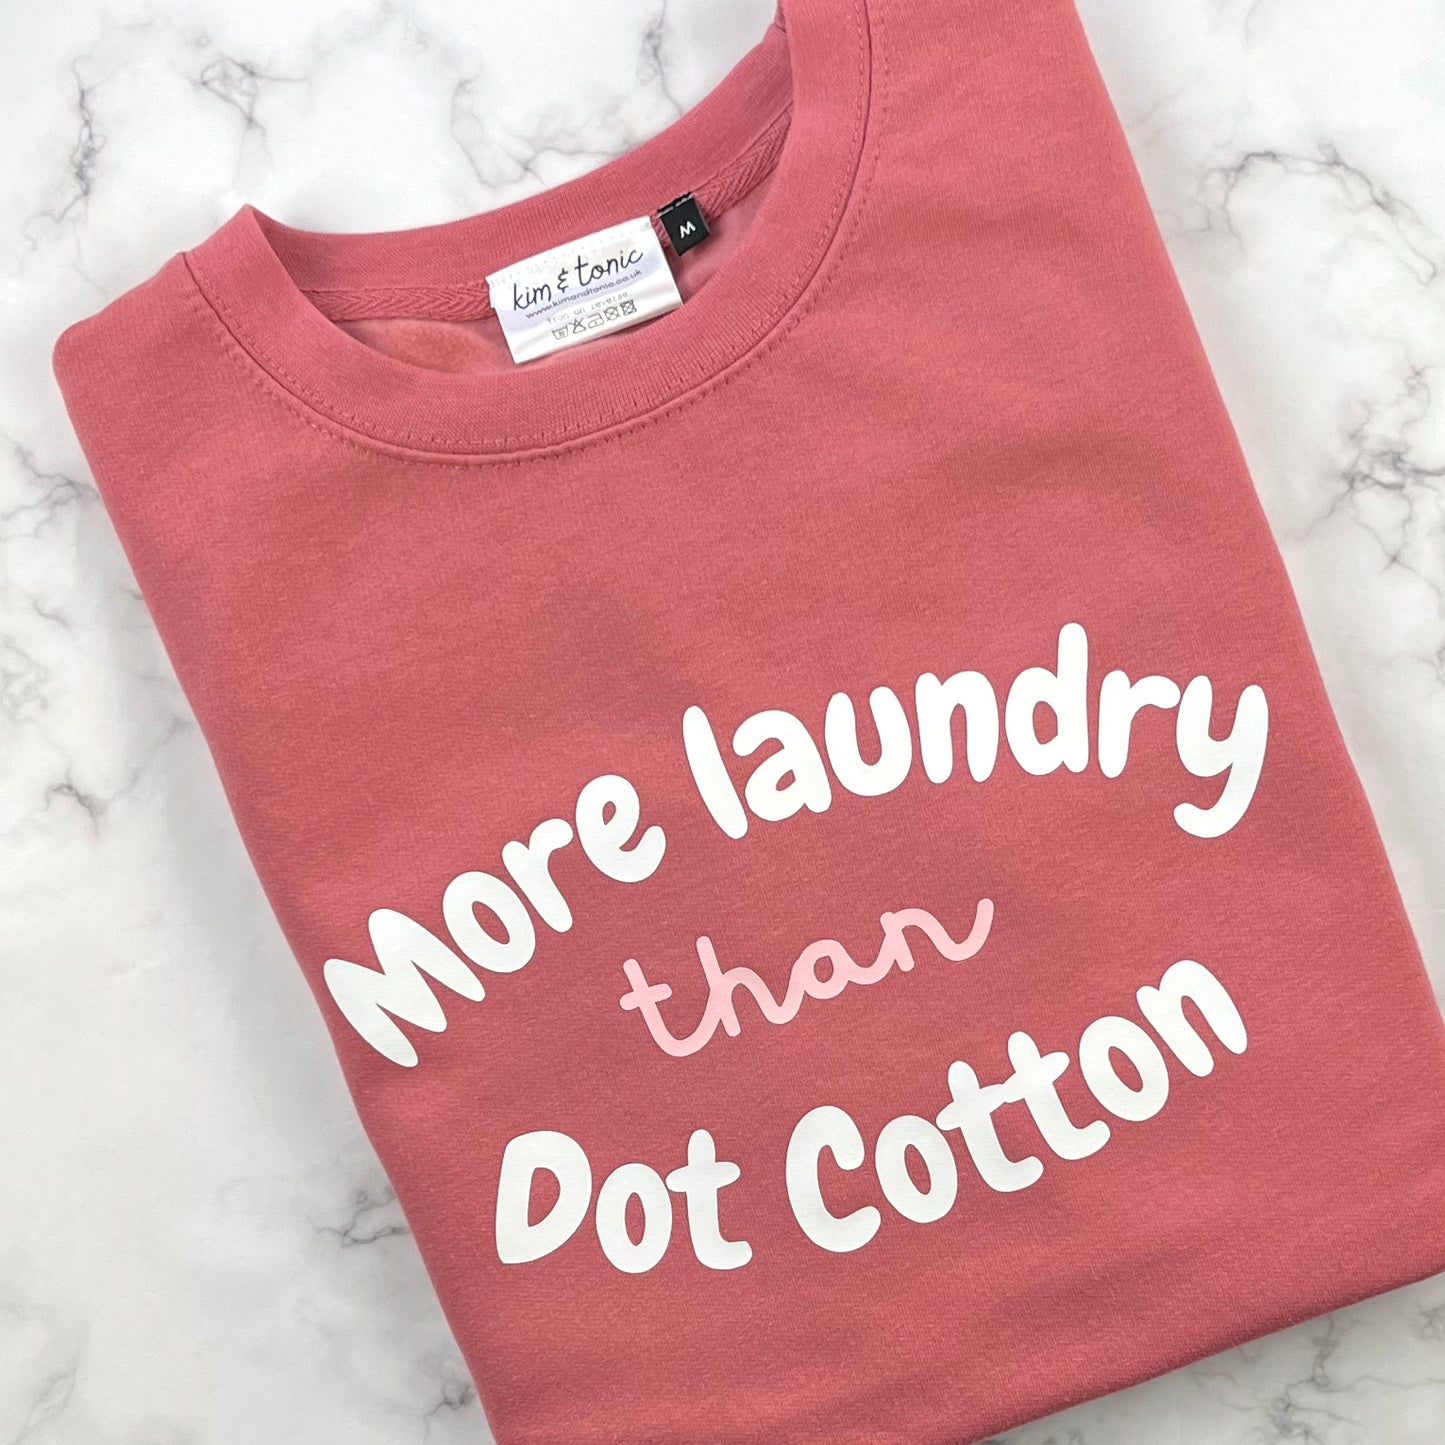 DOT COTTON SWEATSHIRT. Rose pink with white and pink print.